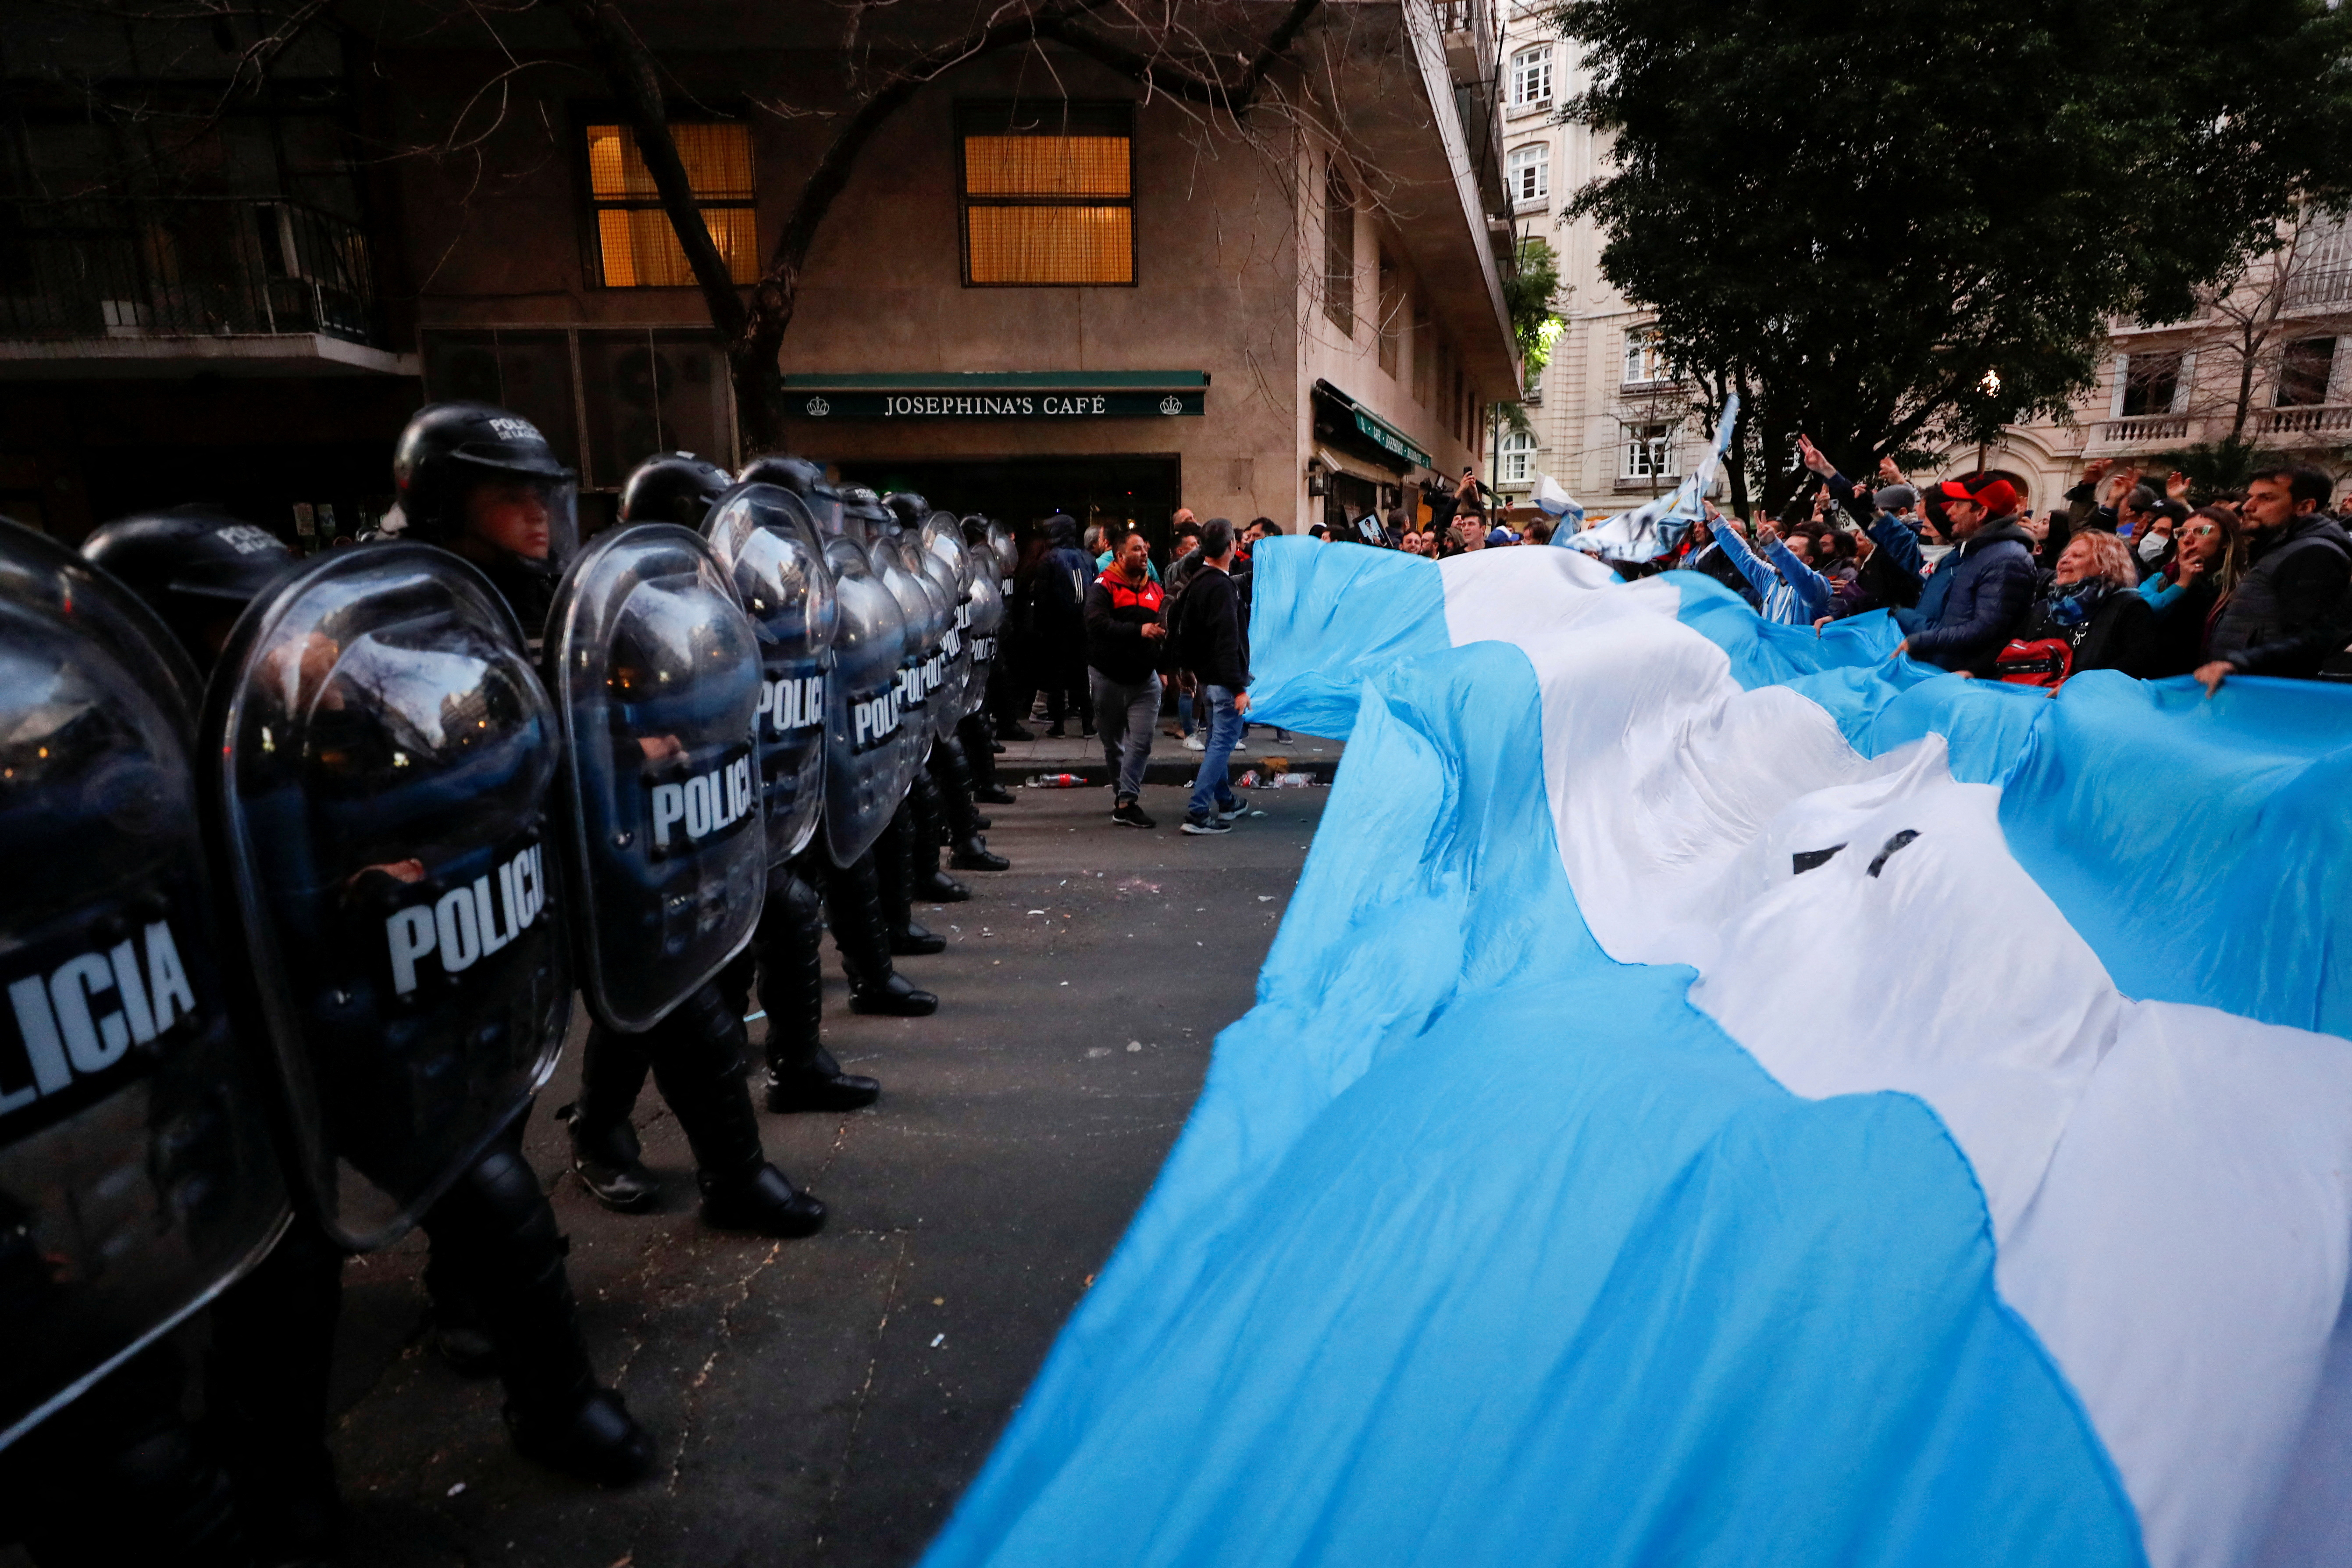 Supporters gather outside the house of Argentina's Vice President Cristina Fernandez de Kirchner as police officers hold their shields, days after Fernandez was accused in a corruption case, in Buenos Aires, Argentina, August 27, 2022. REUTERS/Agustin Marcarian     TPX IMAGES OF THE DAY